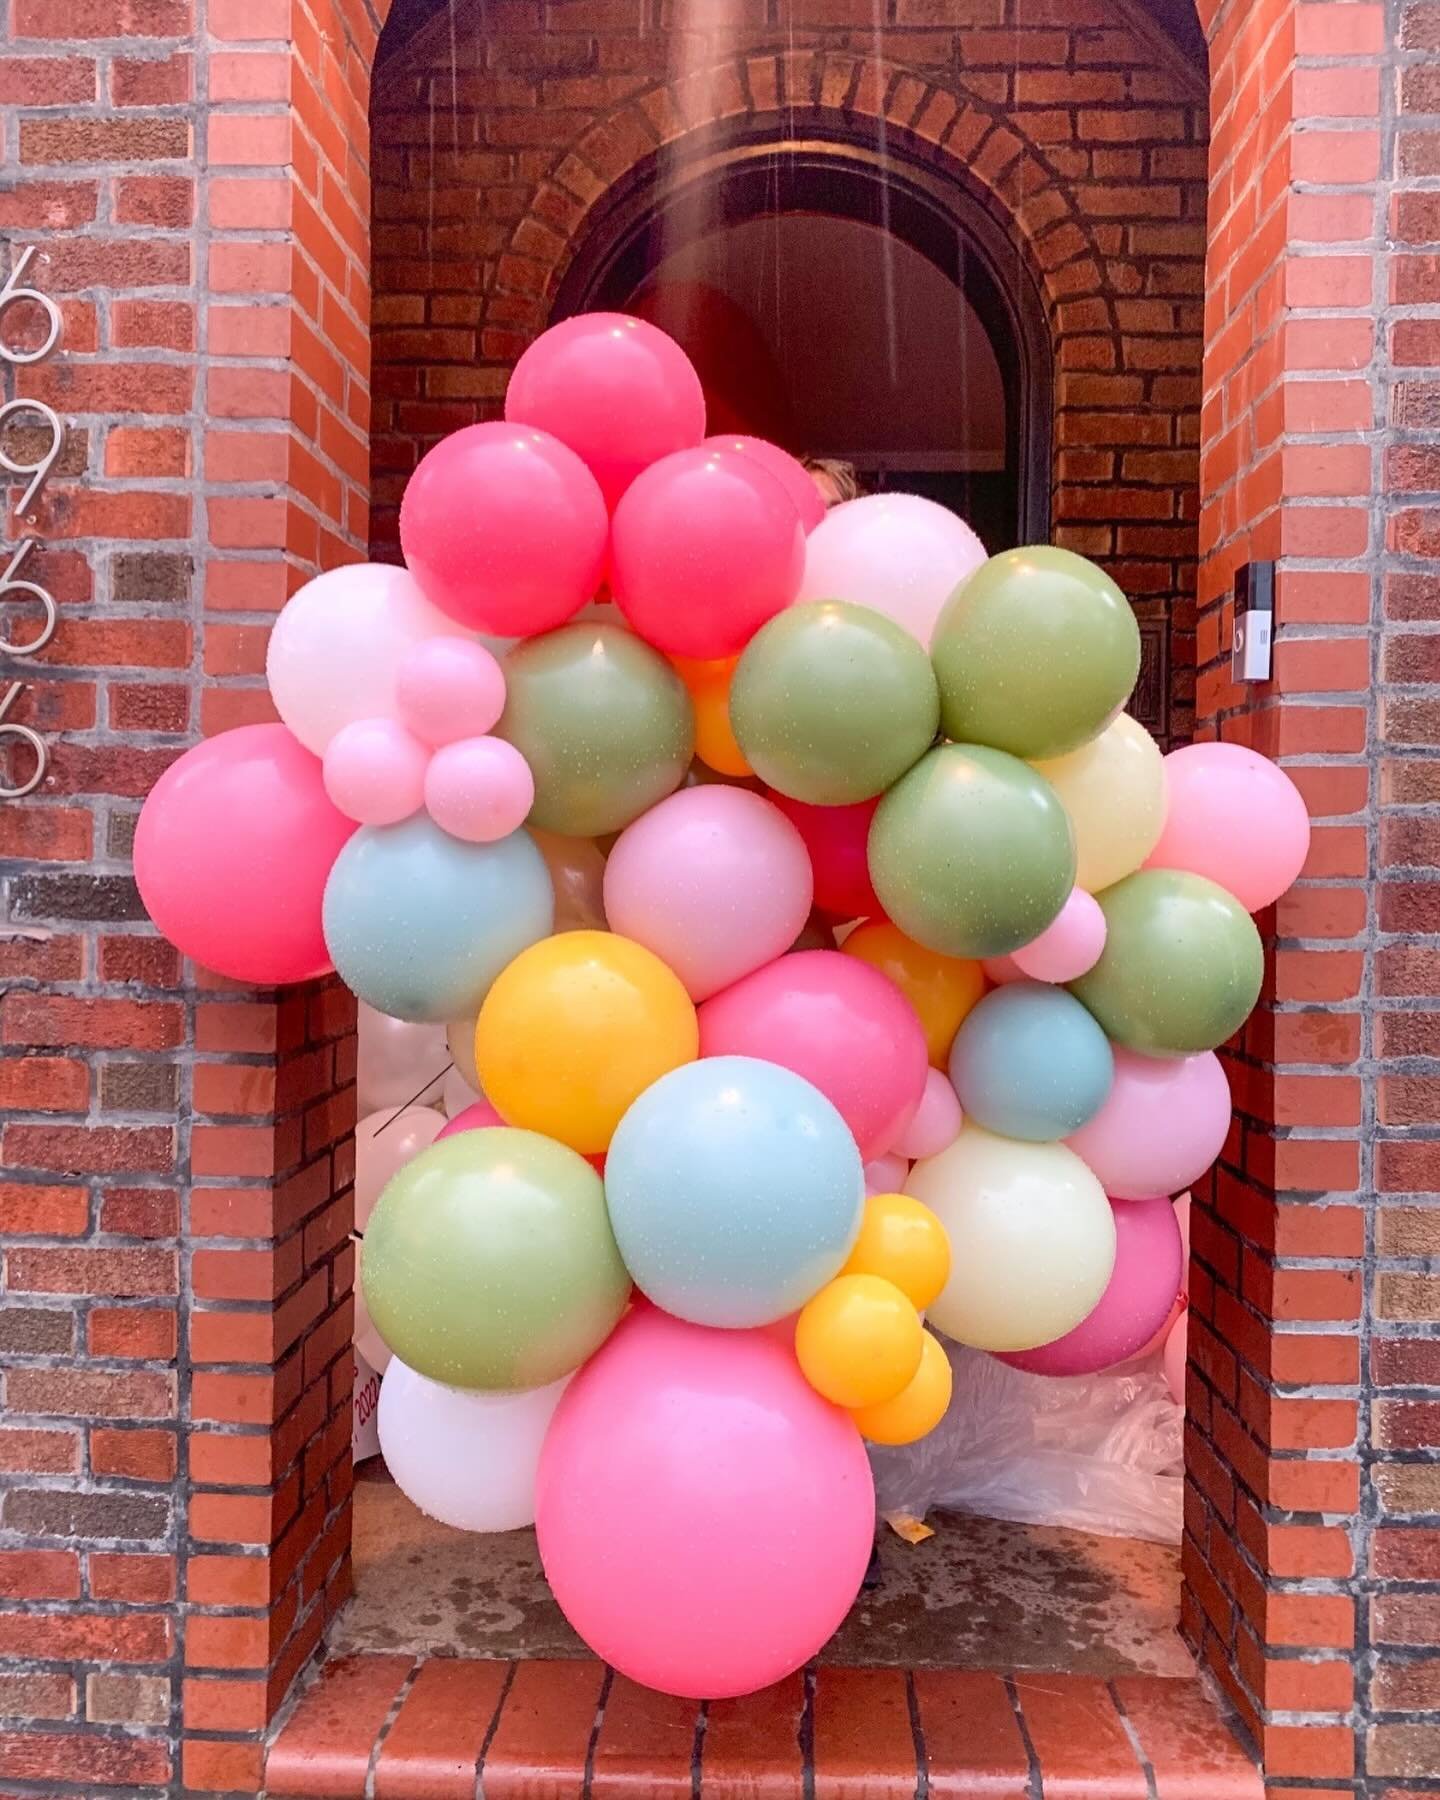 Our balloons can handle any weather - rain or shine! 

We&rsquo;ll make sure your day stays bright, no matter what&rsquo;s going on outside!☀️☔️
-
-
-
#balloondecor #balloondecorations #Stl #StLouisParties #StLouisEvents #partydecor #partyplanning #b